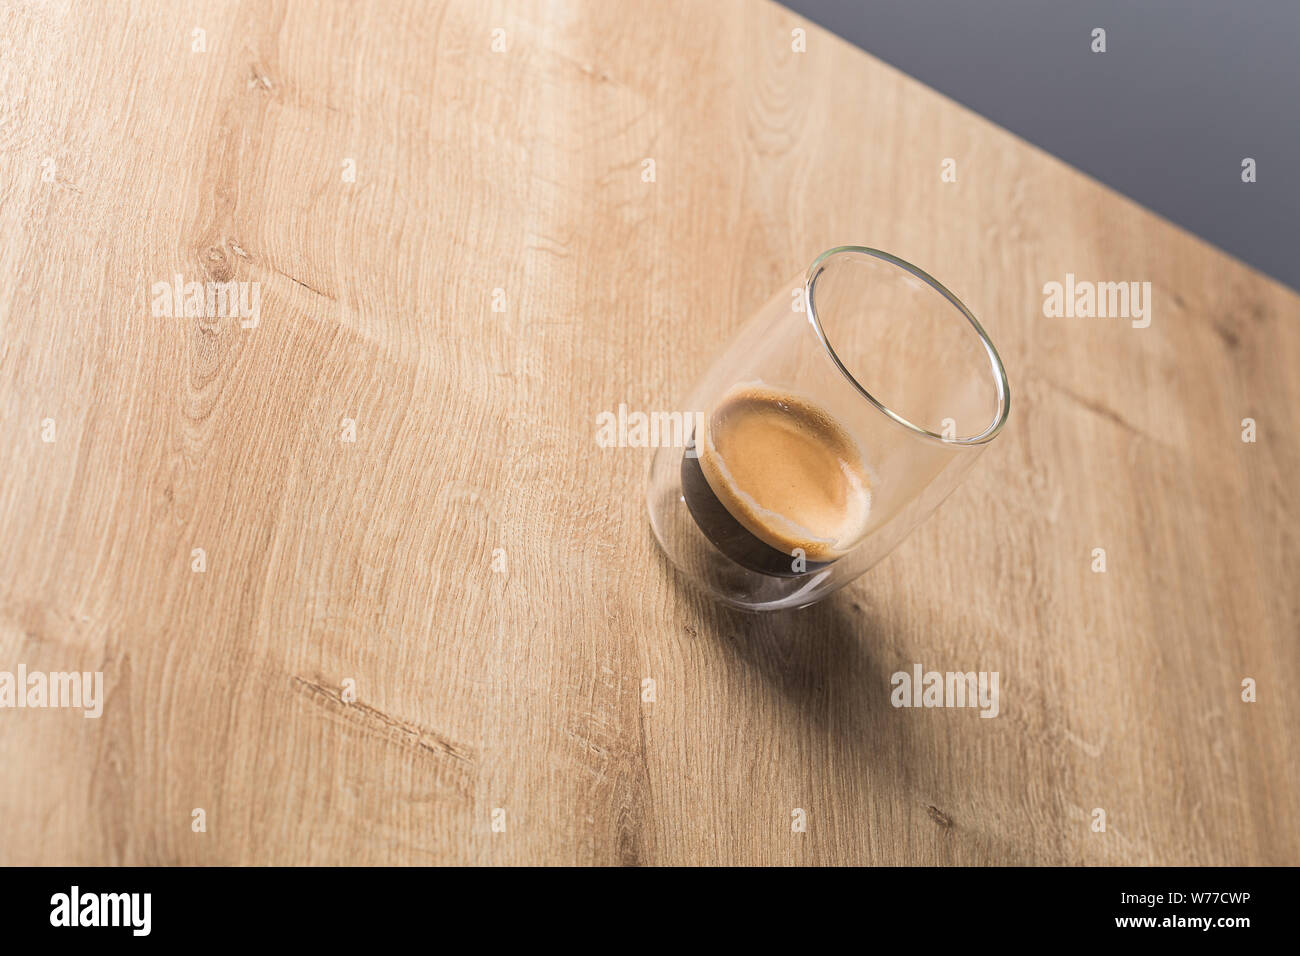 Espresso coffe on a transparent drinking glass on a wooden background Stock Photo